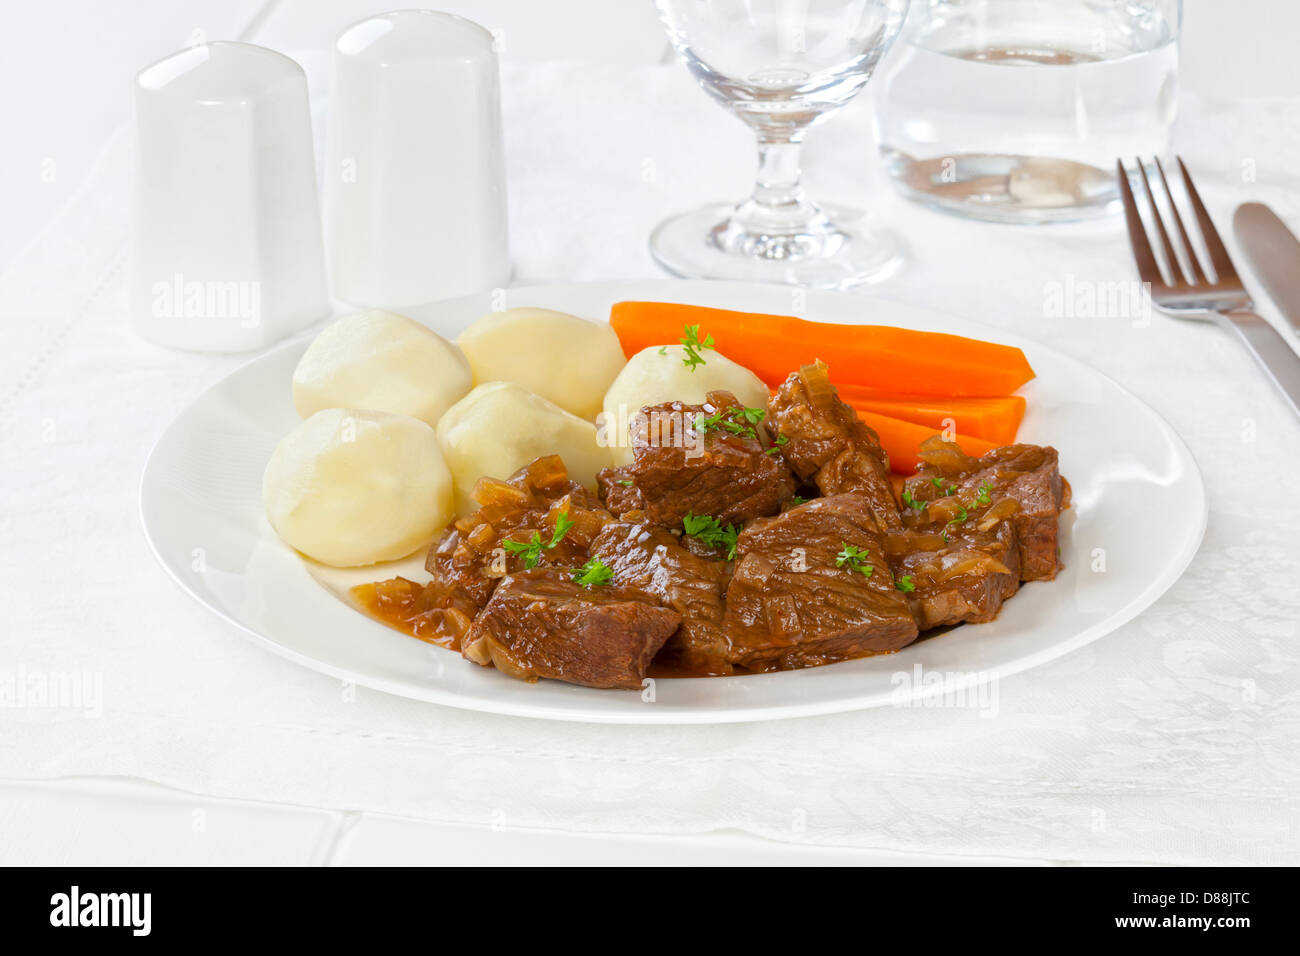 Beef Stew - a plate of simple beef stew with boiled potatoes and carrots. Stock Photo